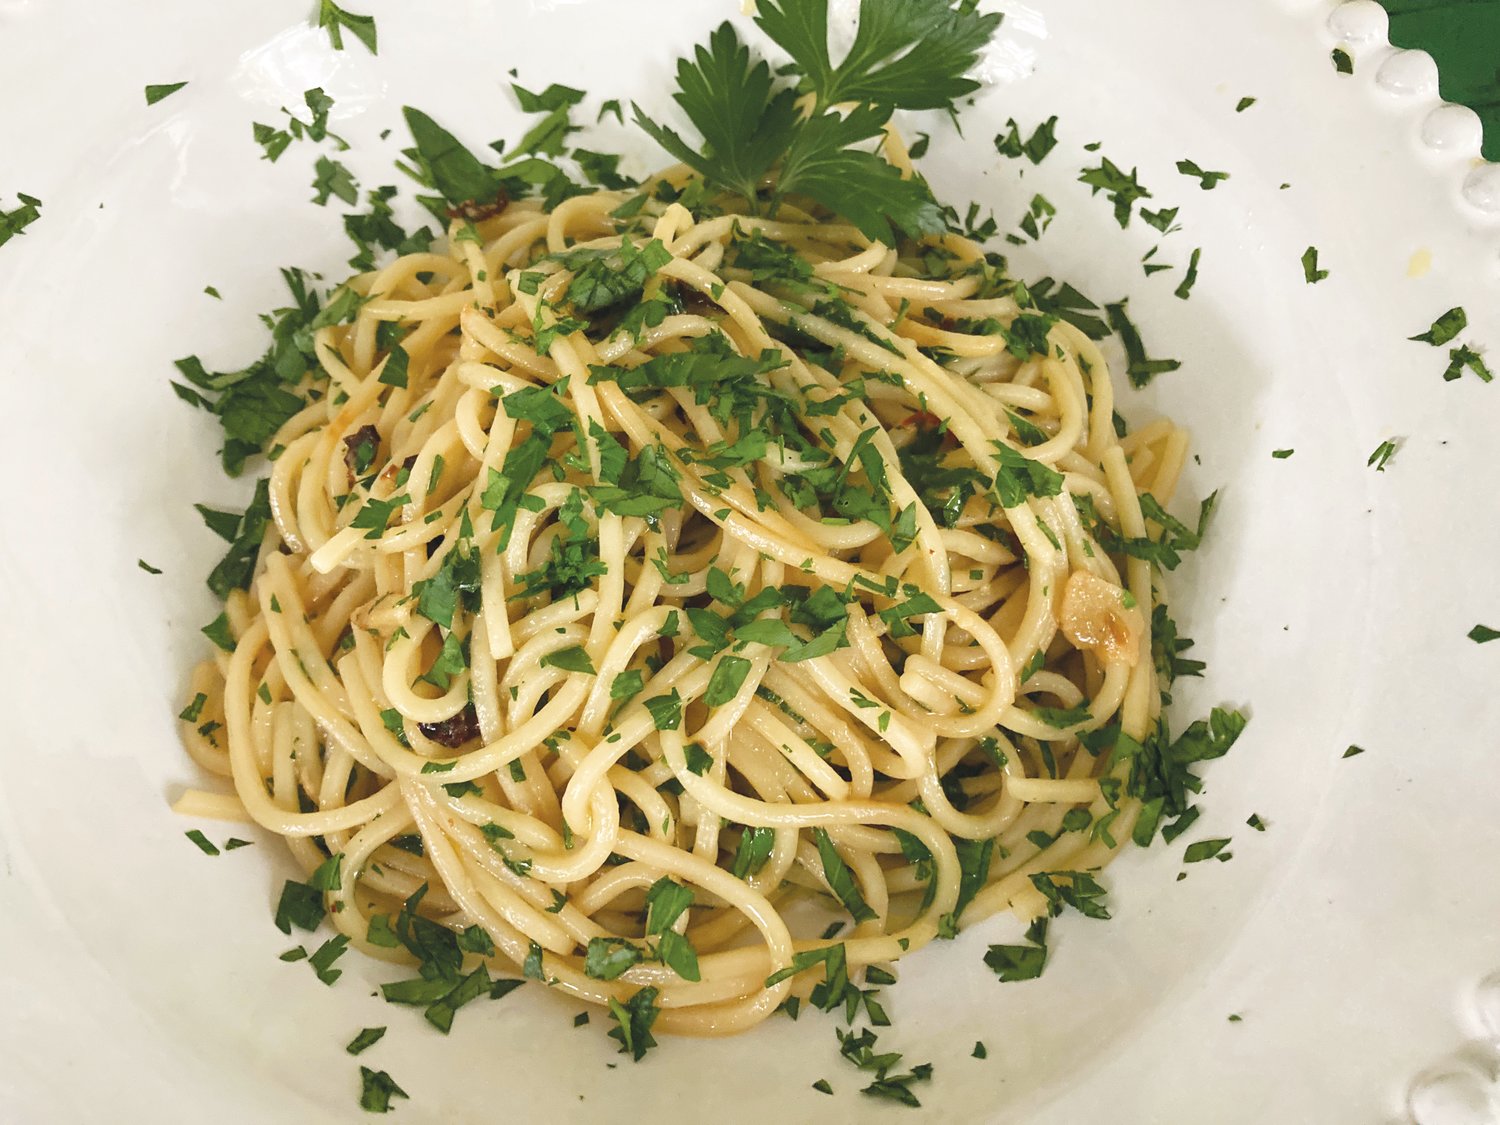 Every maker of Spaghetti Aglio, Olio e Peperoncino - Spaghetti with Garlic, Oil and Hot Peppers – has their own way of putting it together, but they all use the same ingredients.